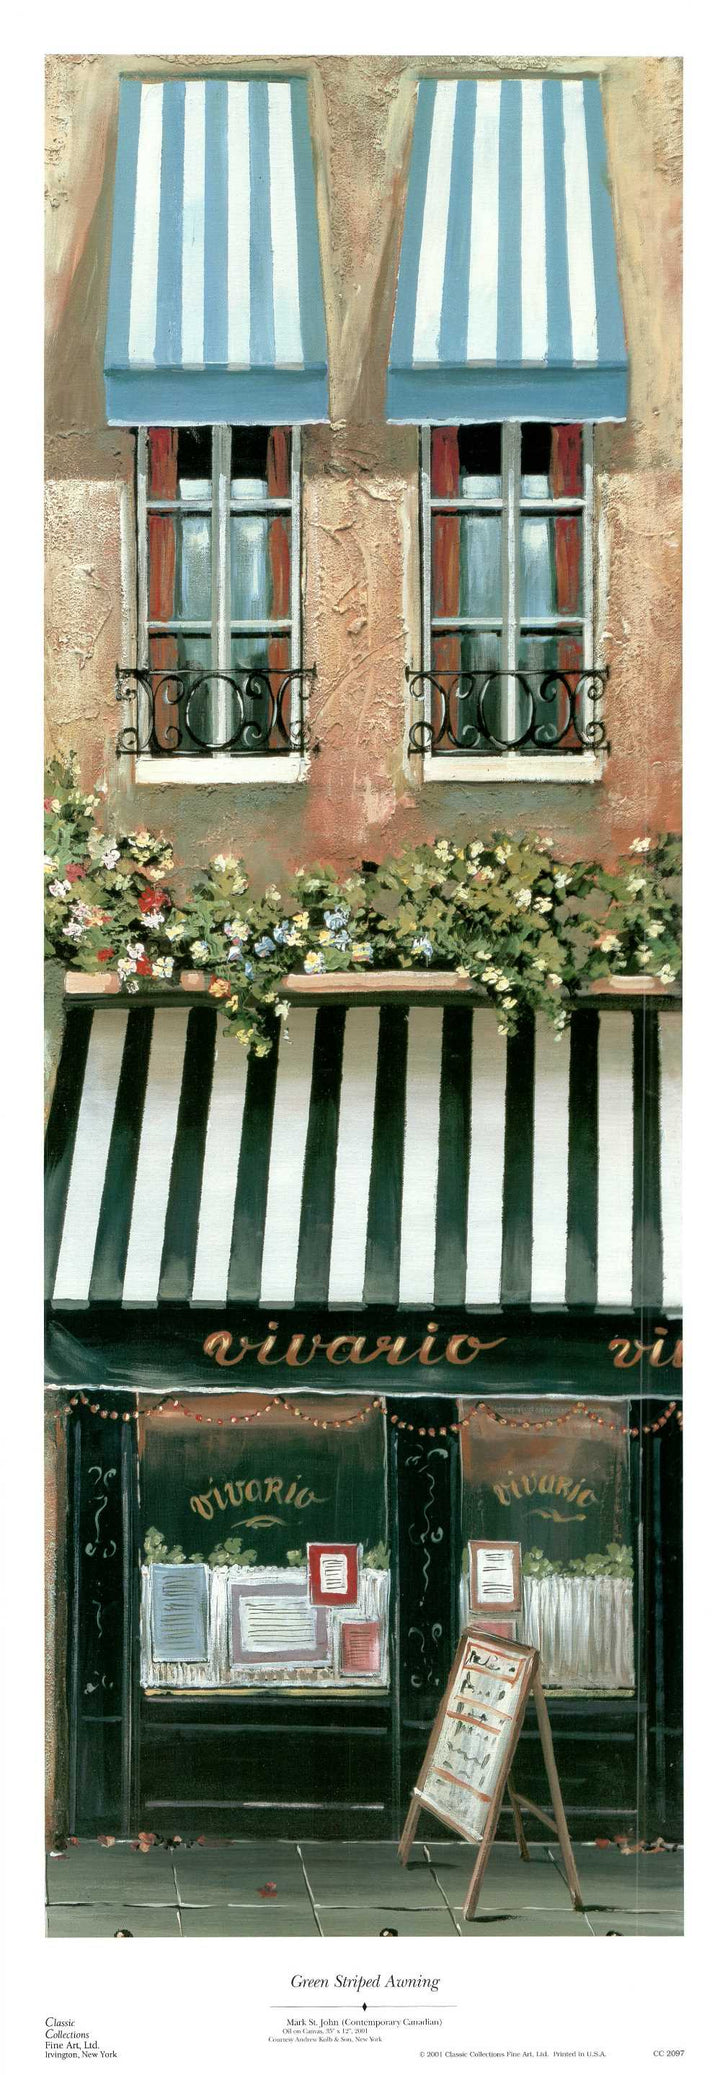 Green Striped Awning by Mark St. John - 14 X 39 Inches (Art Print)